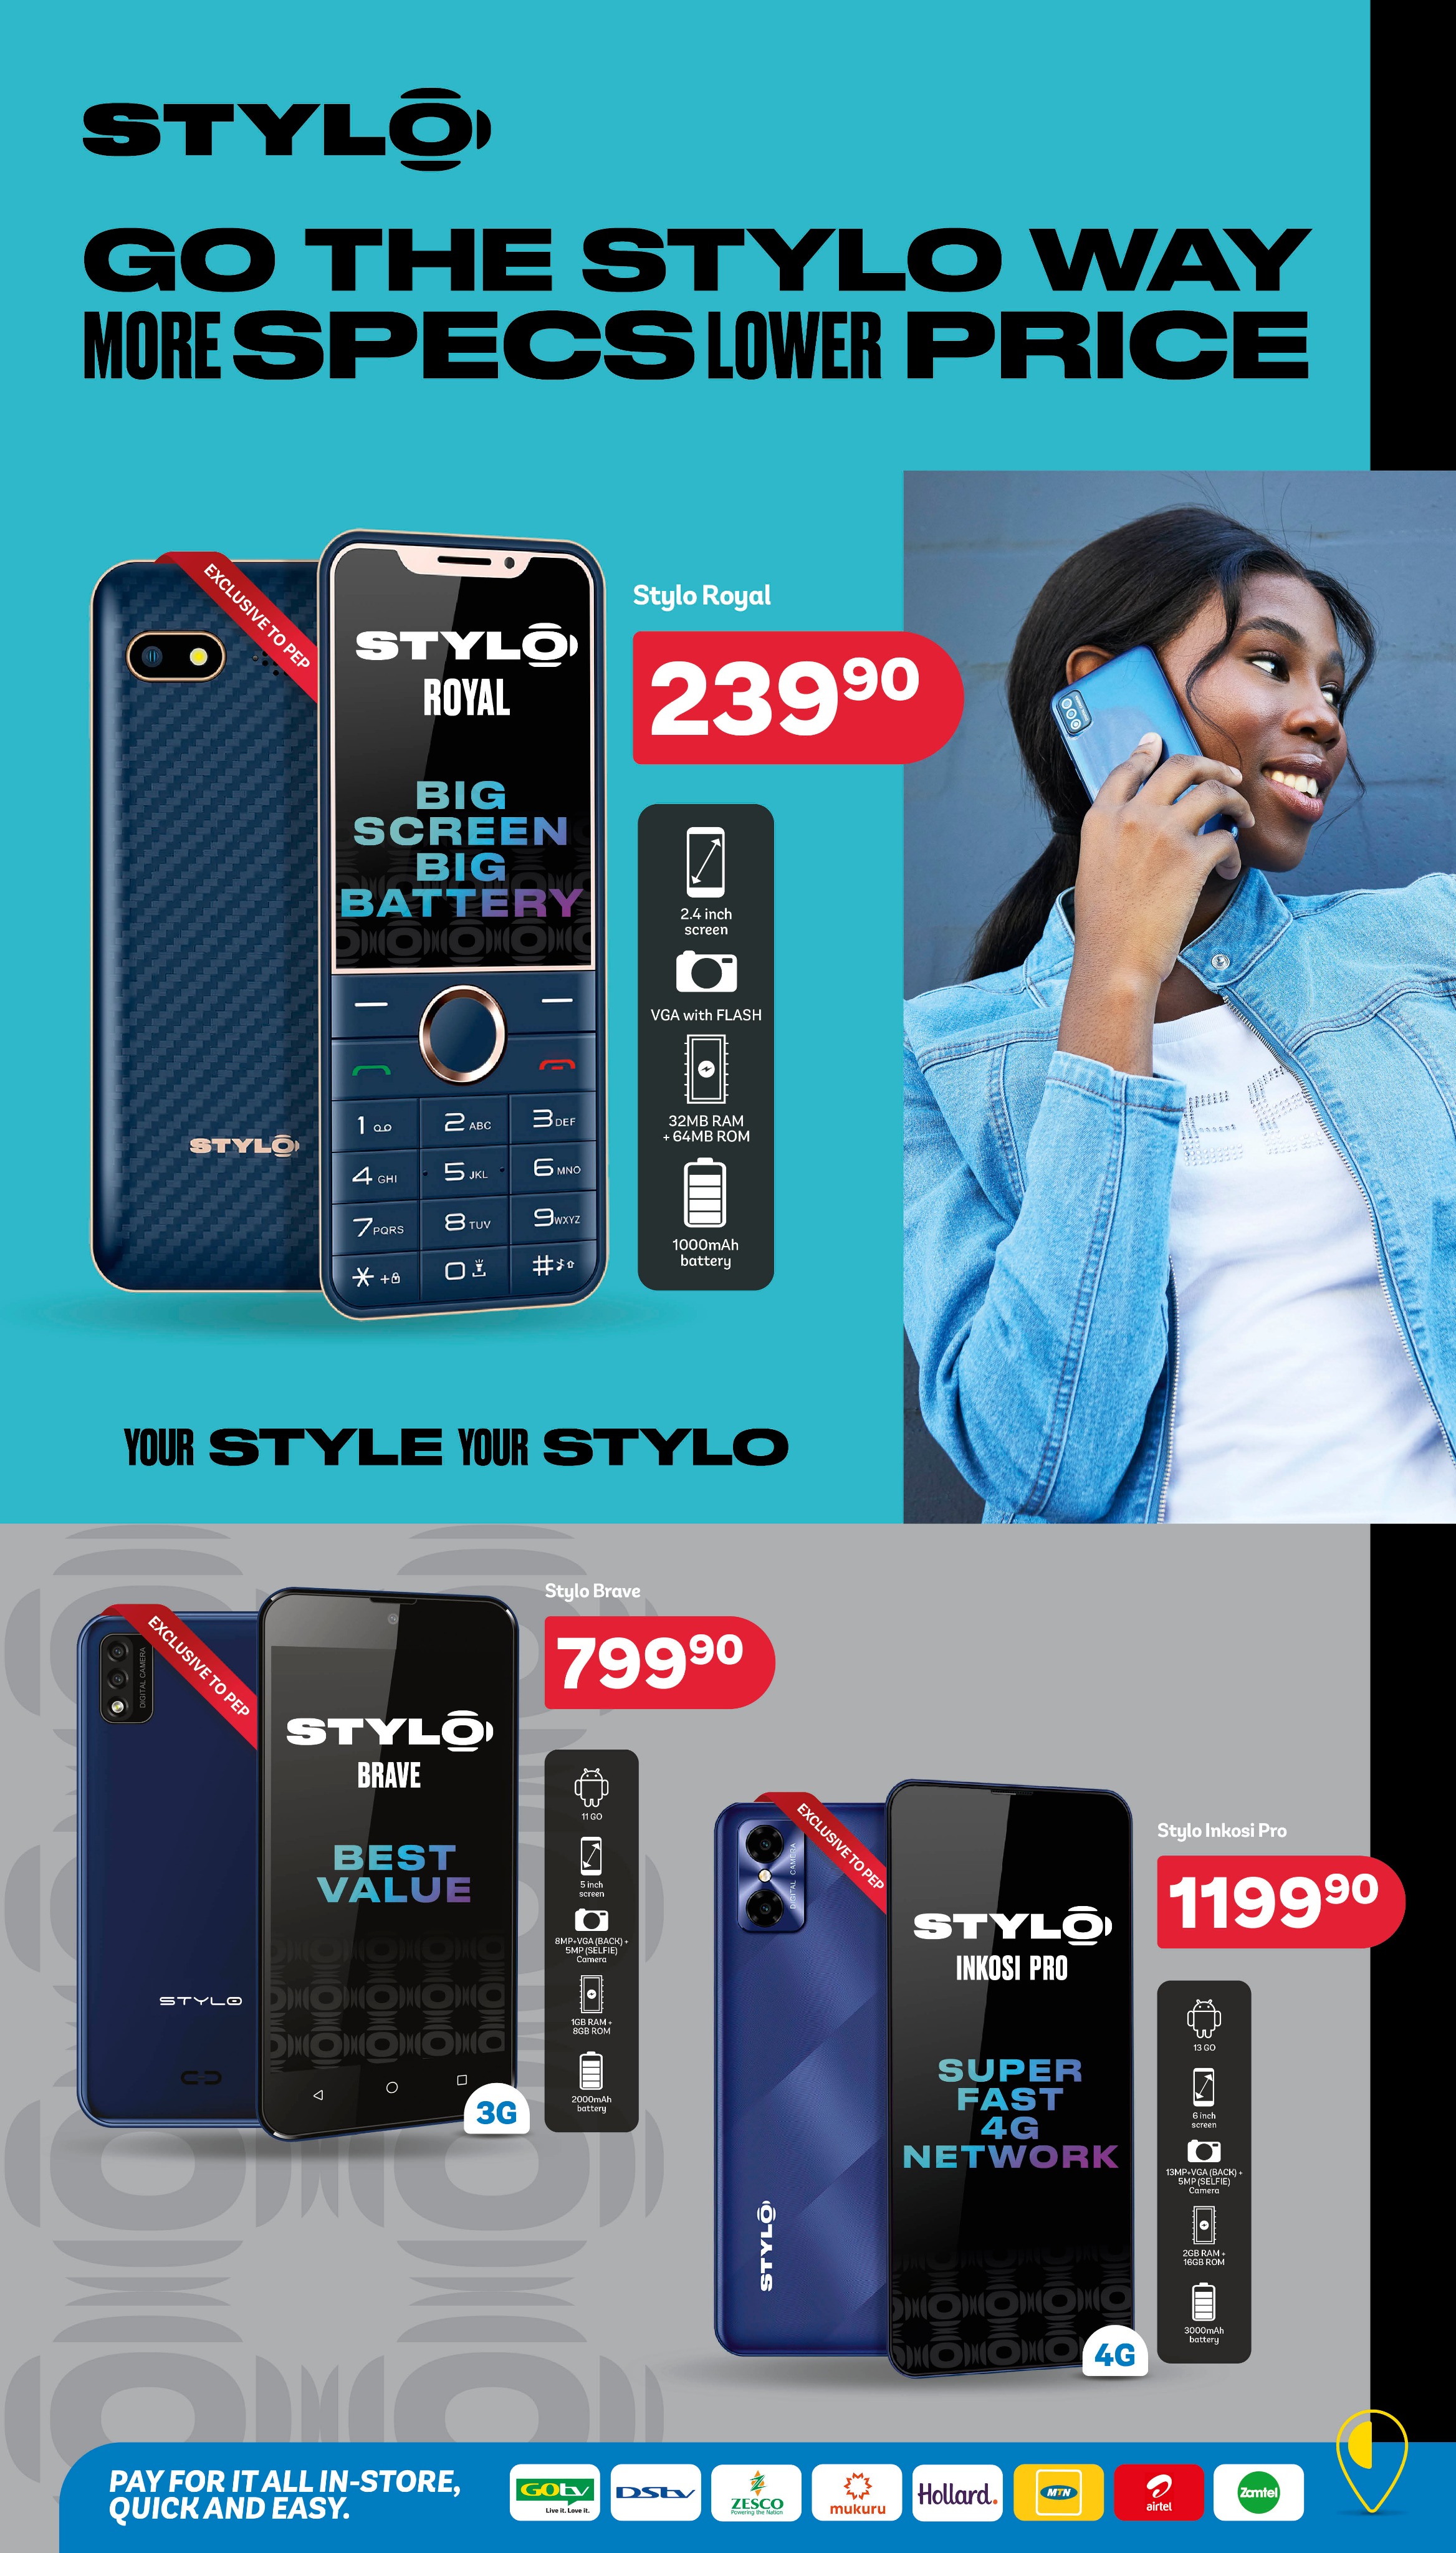 Live Your Way for Less with Stylo - Low Price Phones